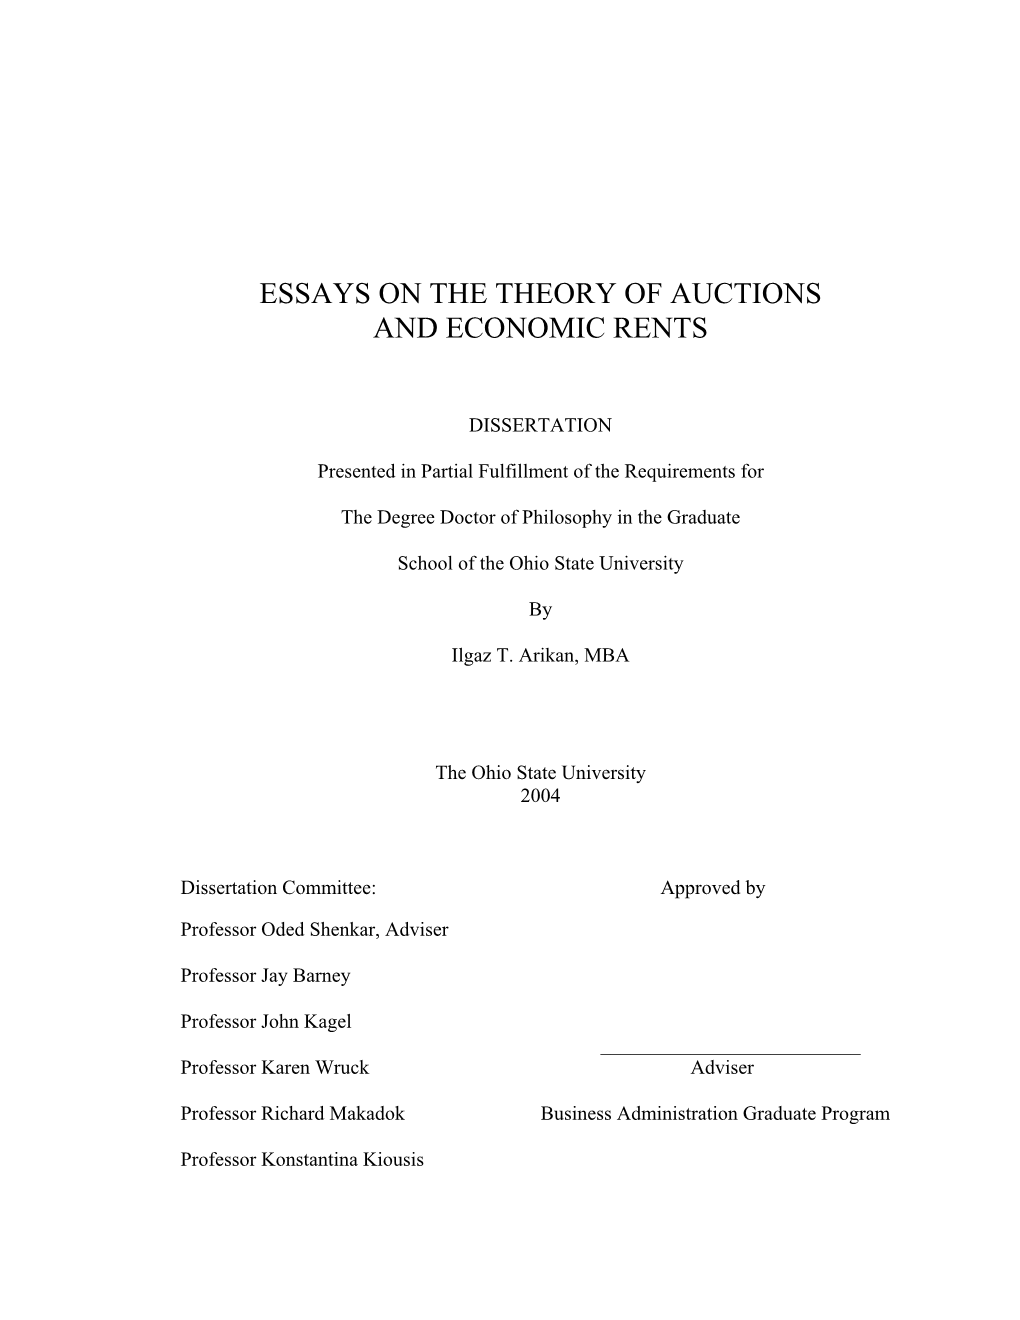 Essays on the Theory of Auctions and Economic Rents